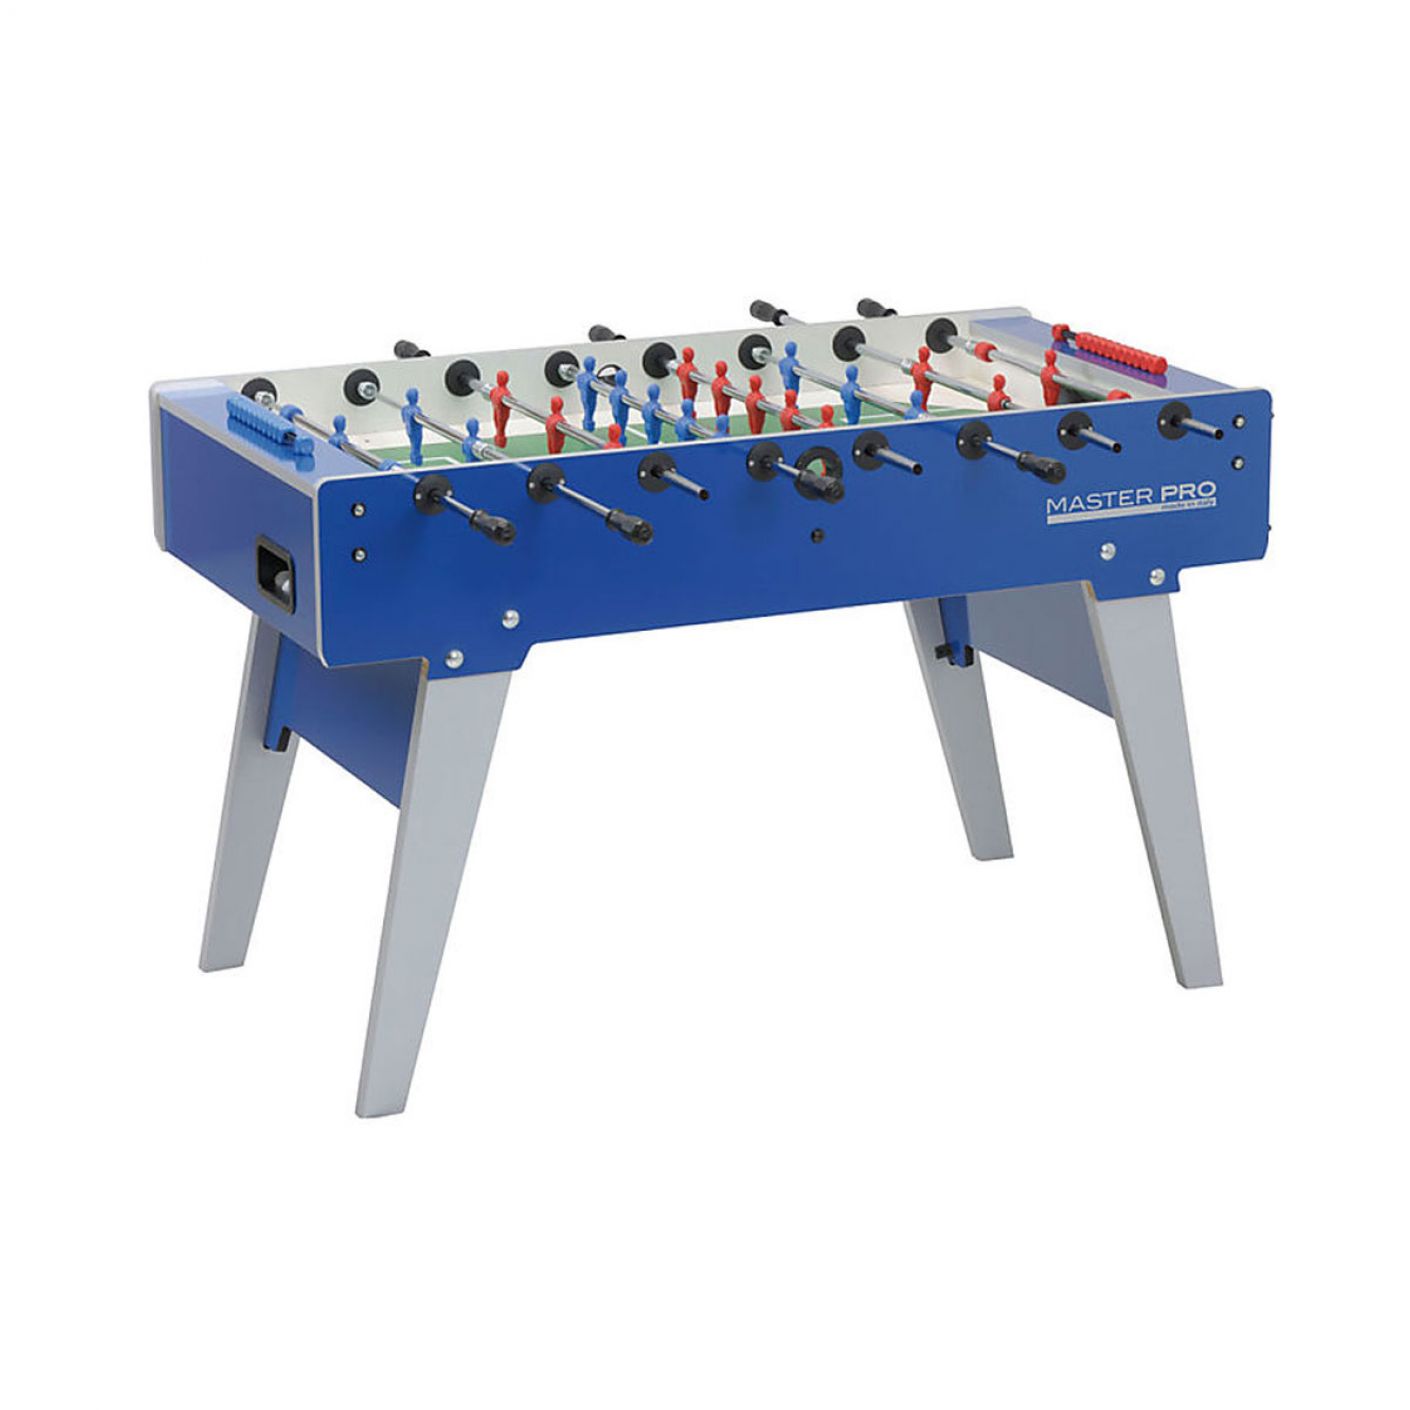 Garlando Football Table Master Pro with outgoing rods, folding legs